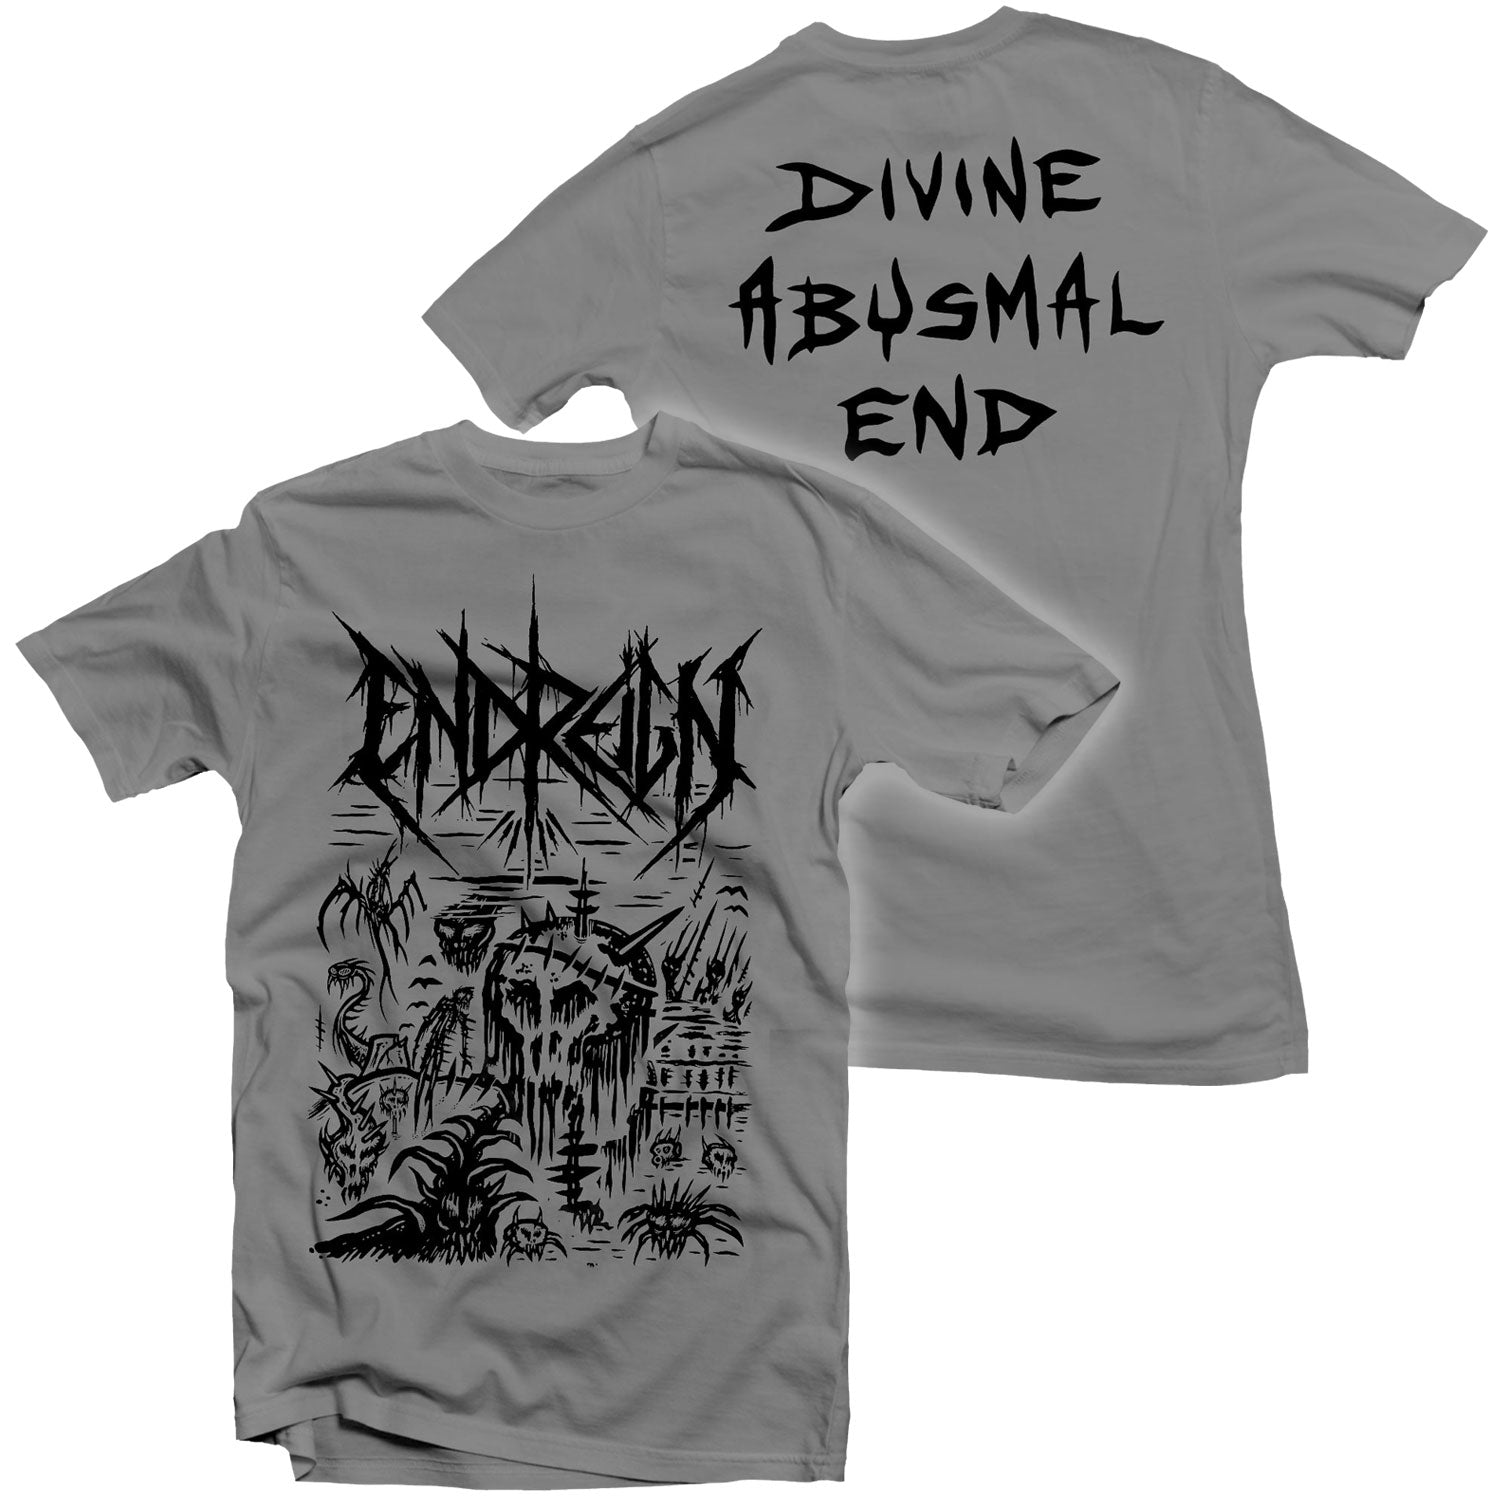 End Reign "The Way Of All Flesh Is Decay" T-Shirt